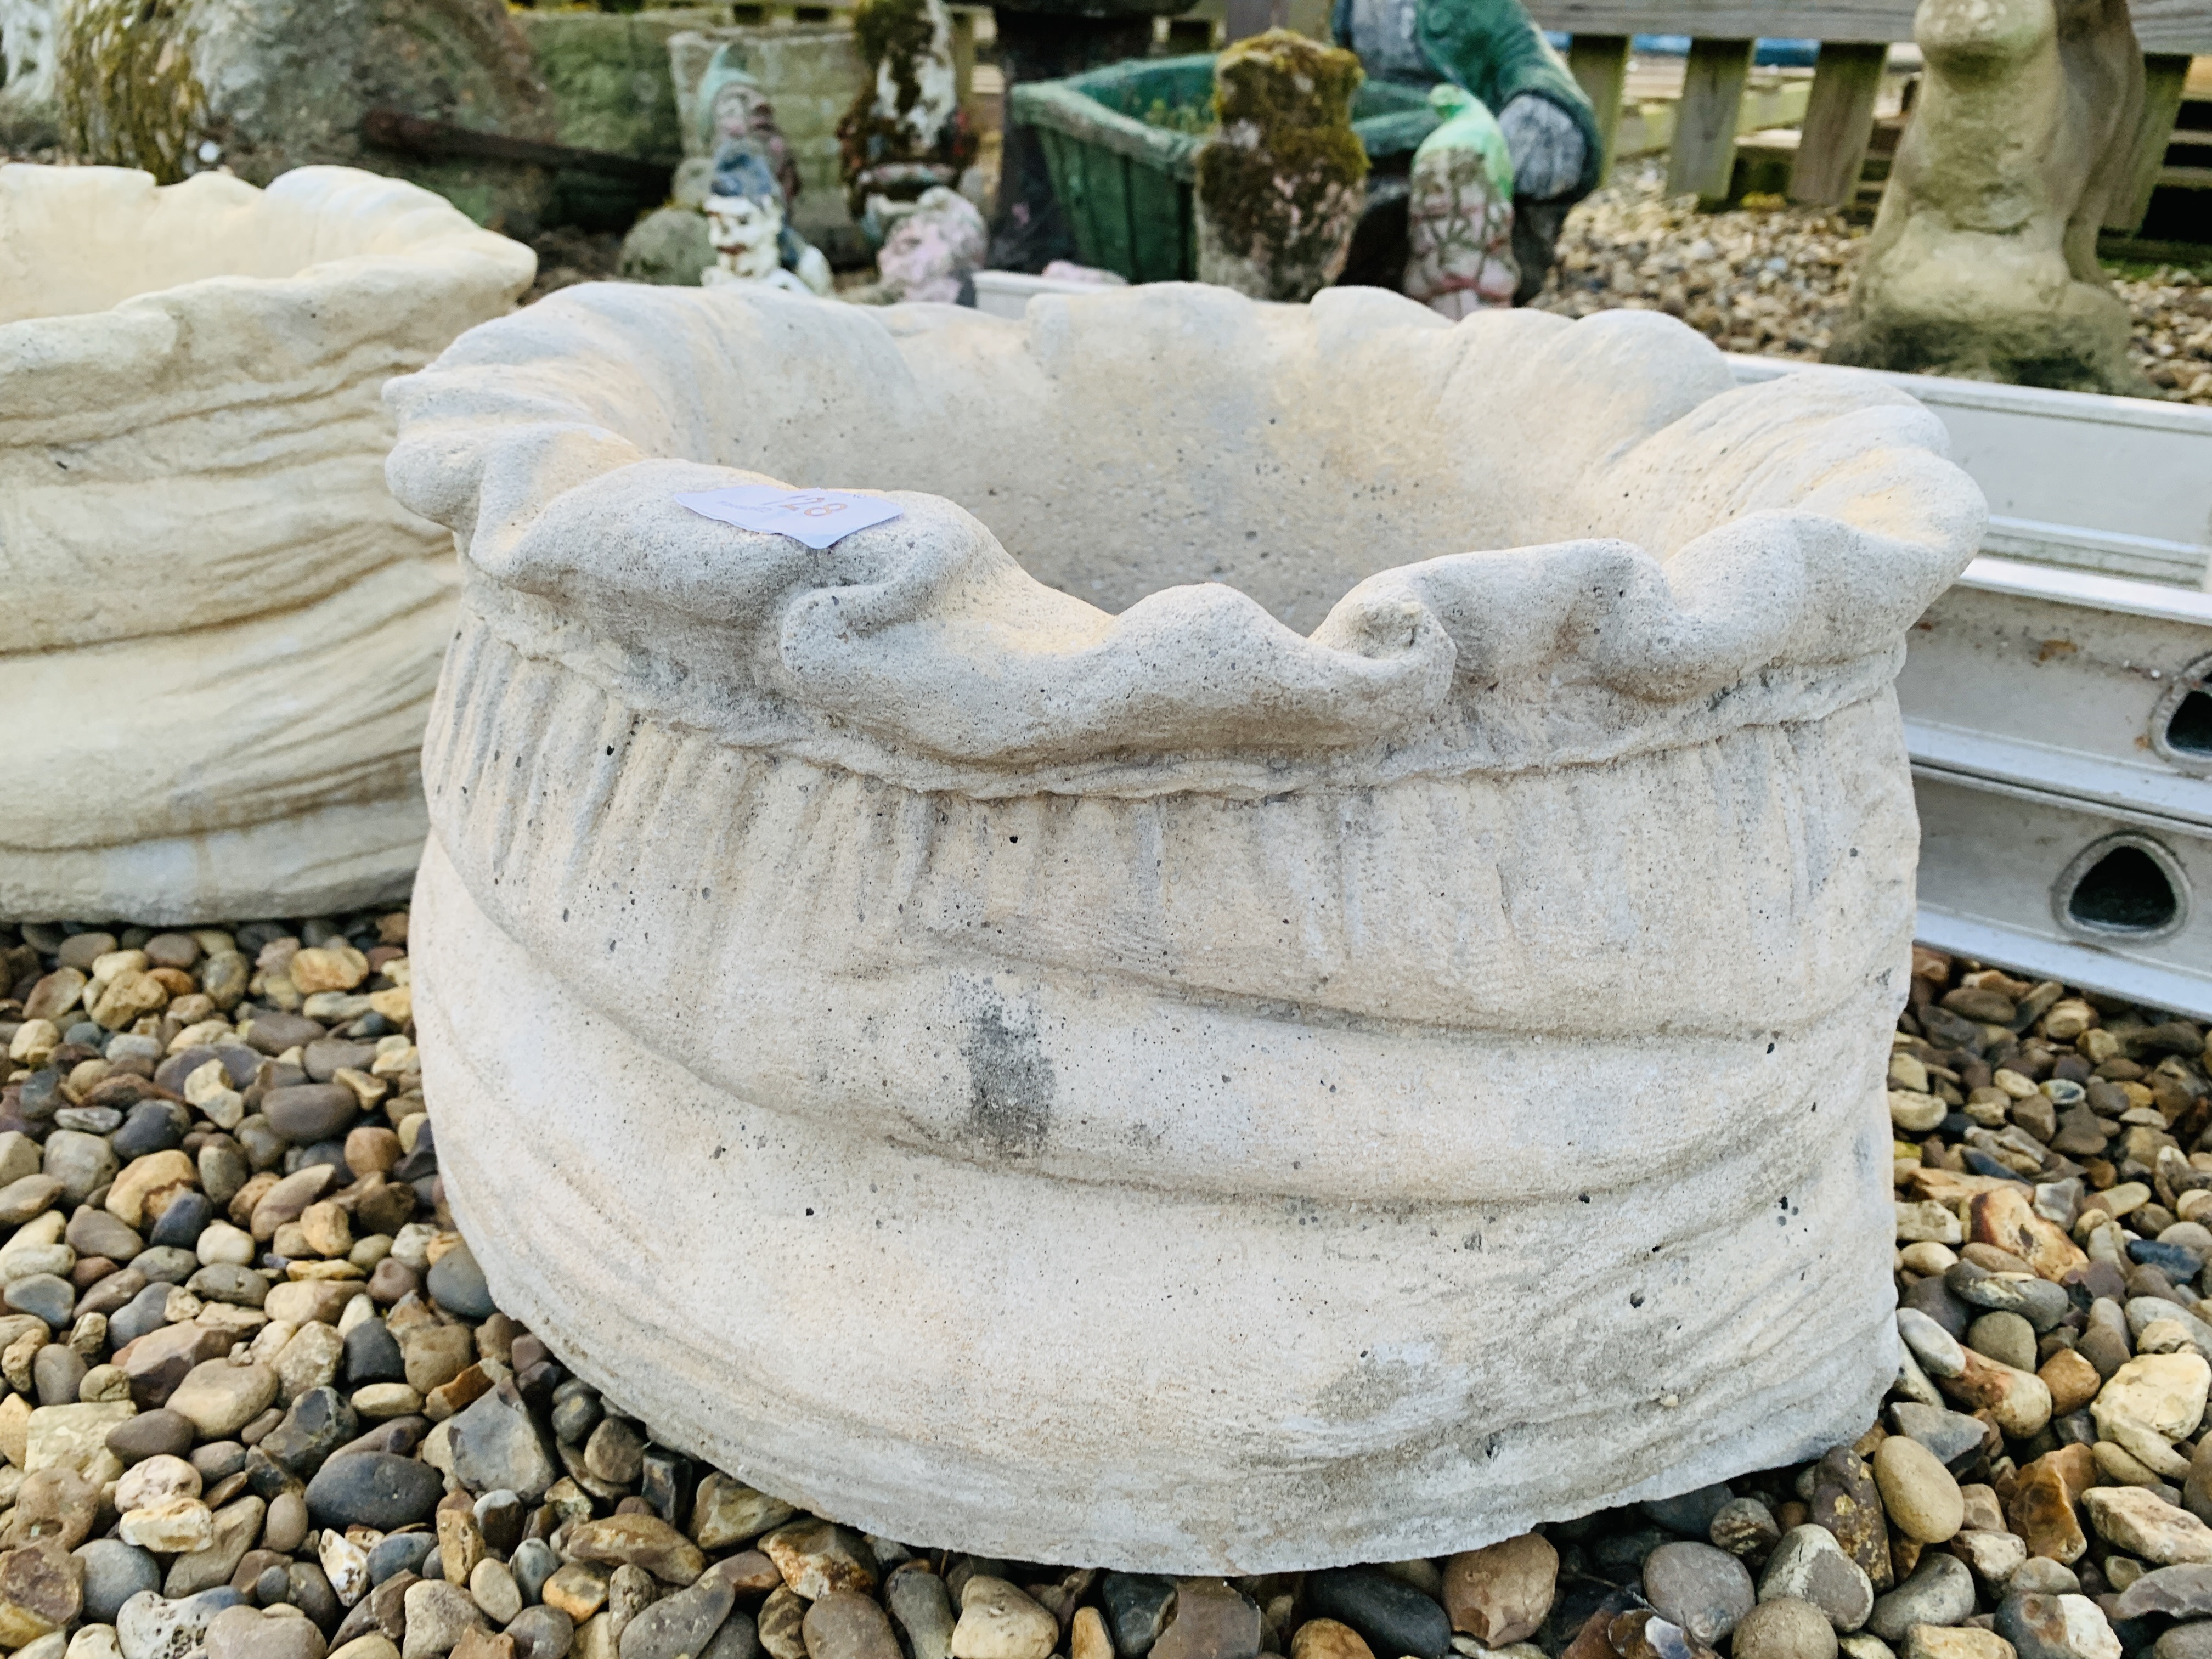 A PAIR OF STONEWORK SACK DESIGN PLANTERS - HEIGHT 25CM. WIDTH 40CM. - Image 2 of 3